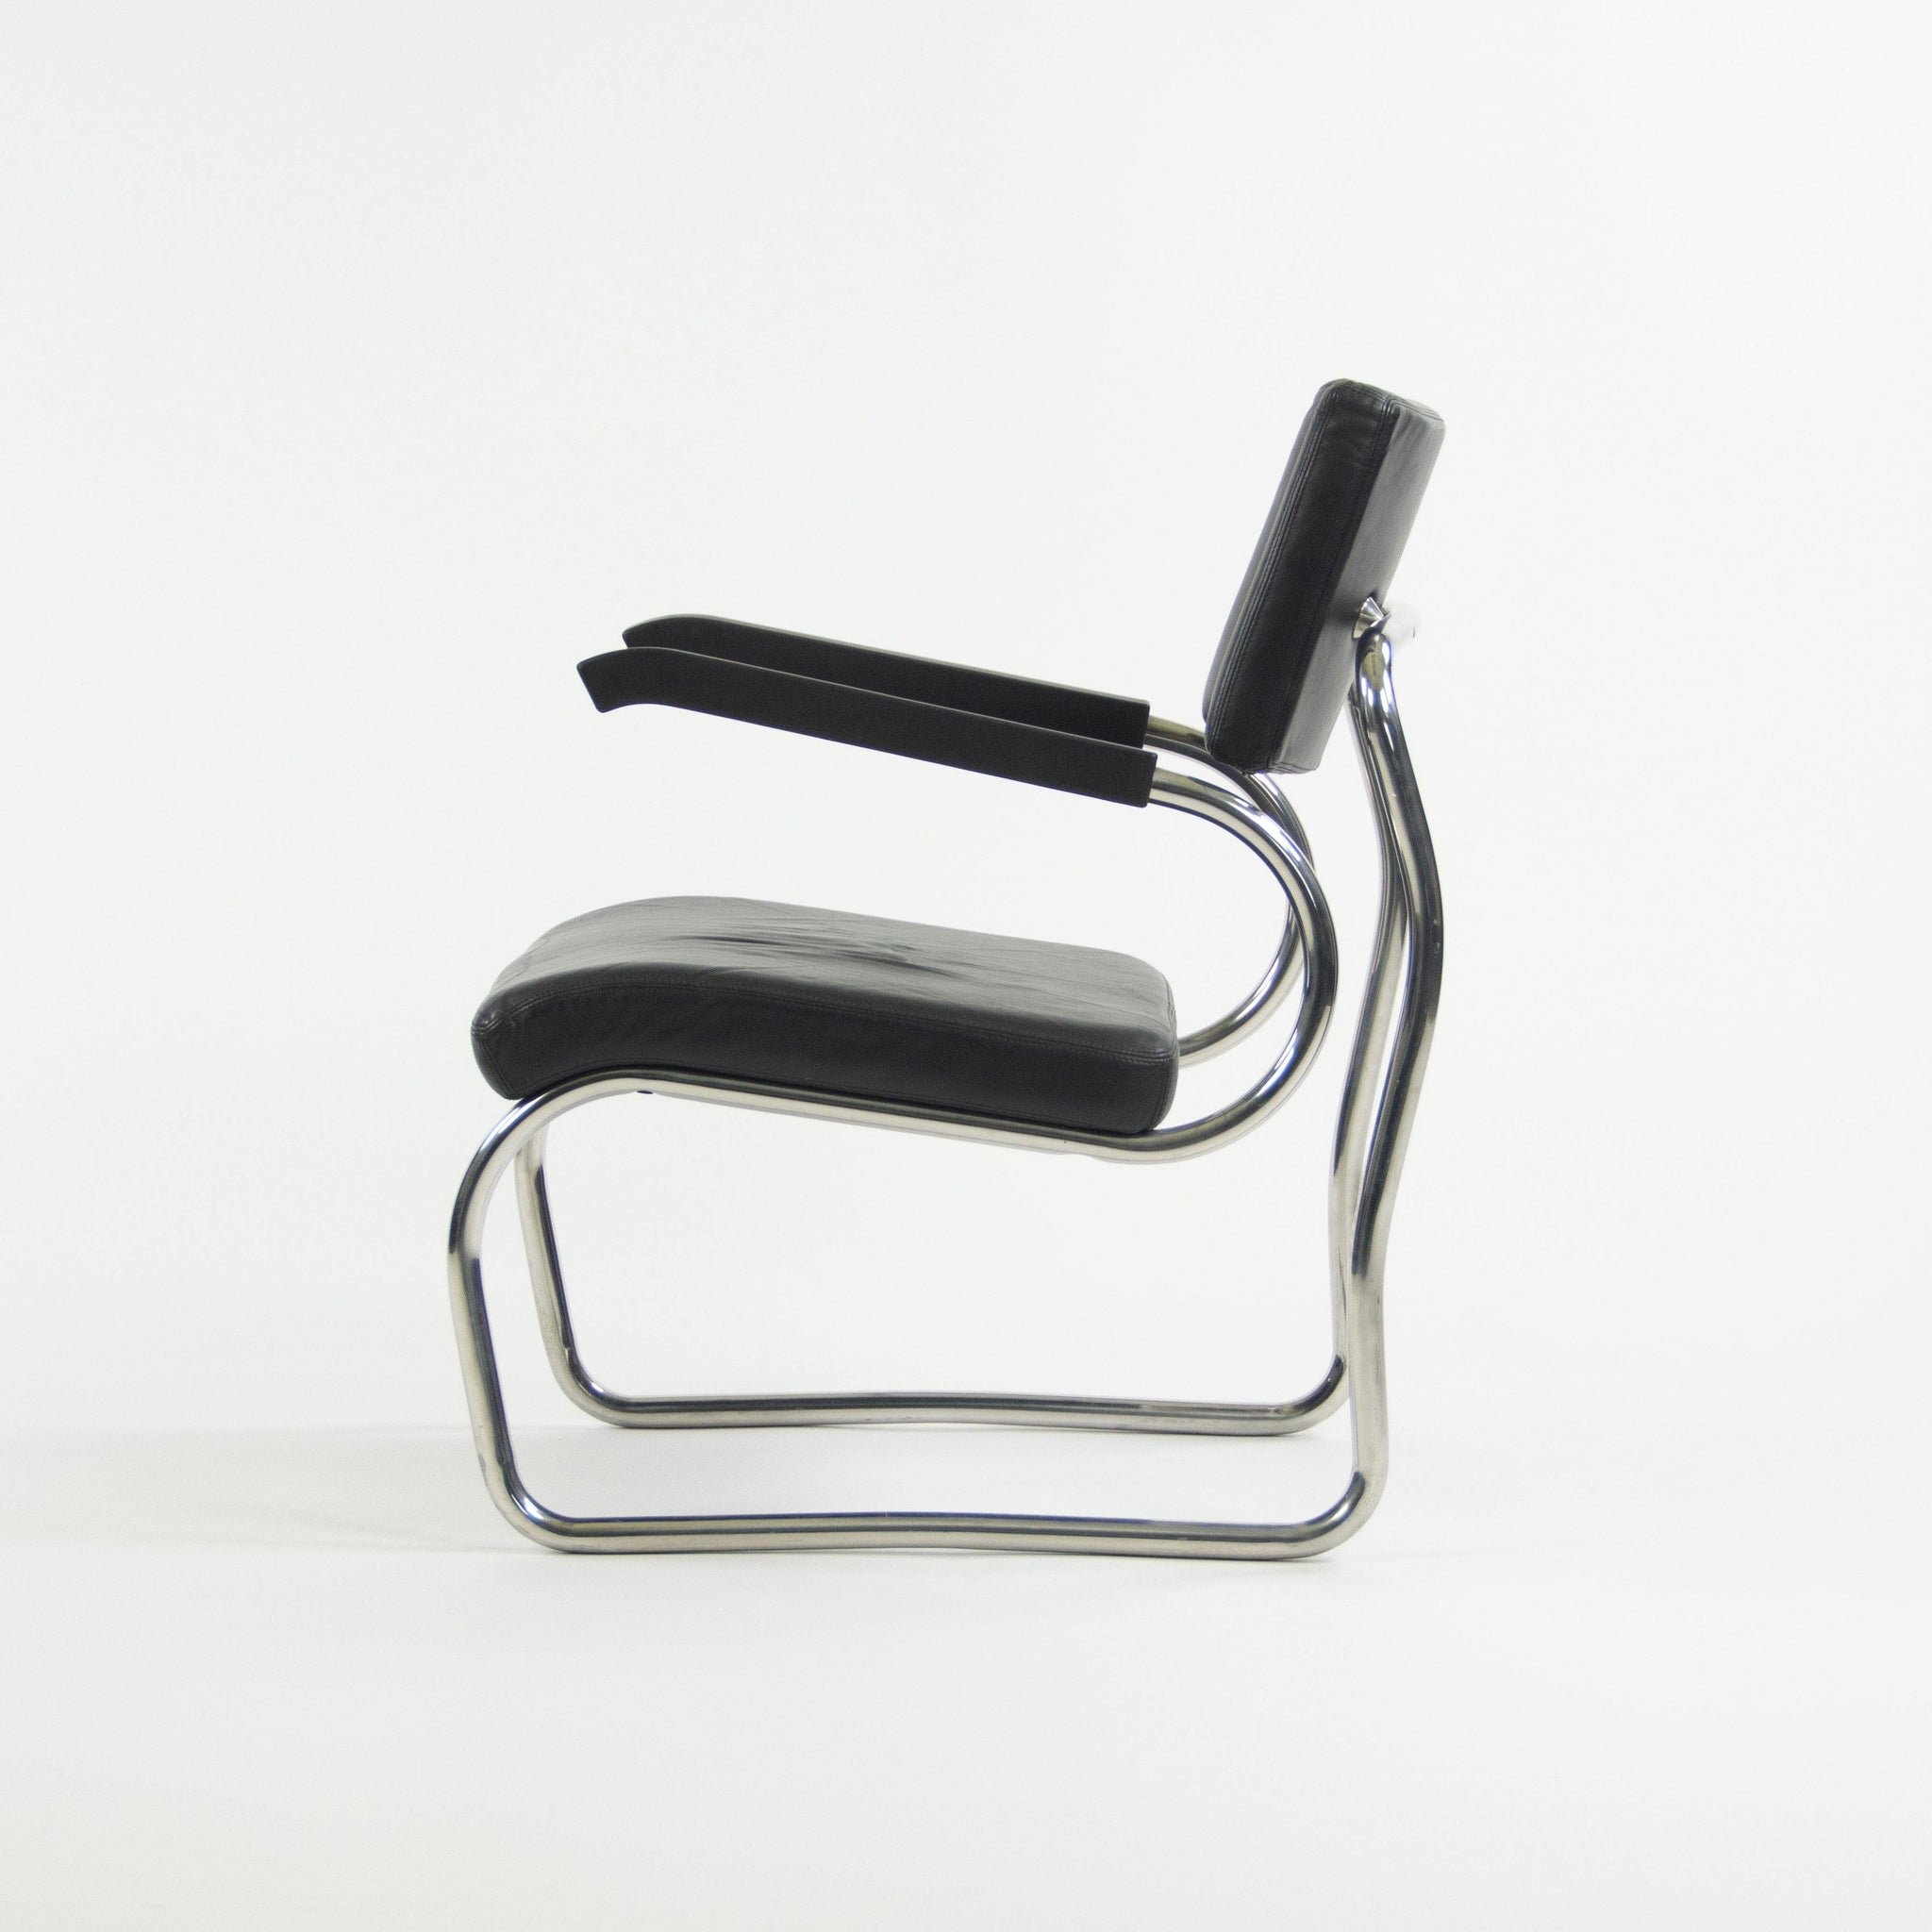 1990s Pair of Sant'elia Arm Chairs by Giuseppe Terragni for Zanotta Leather and Stainless - Rarify Inc.